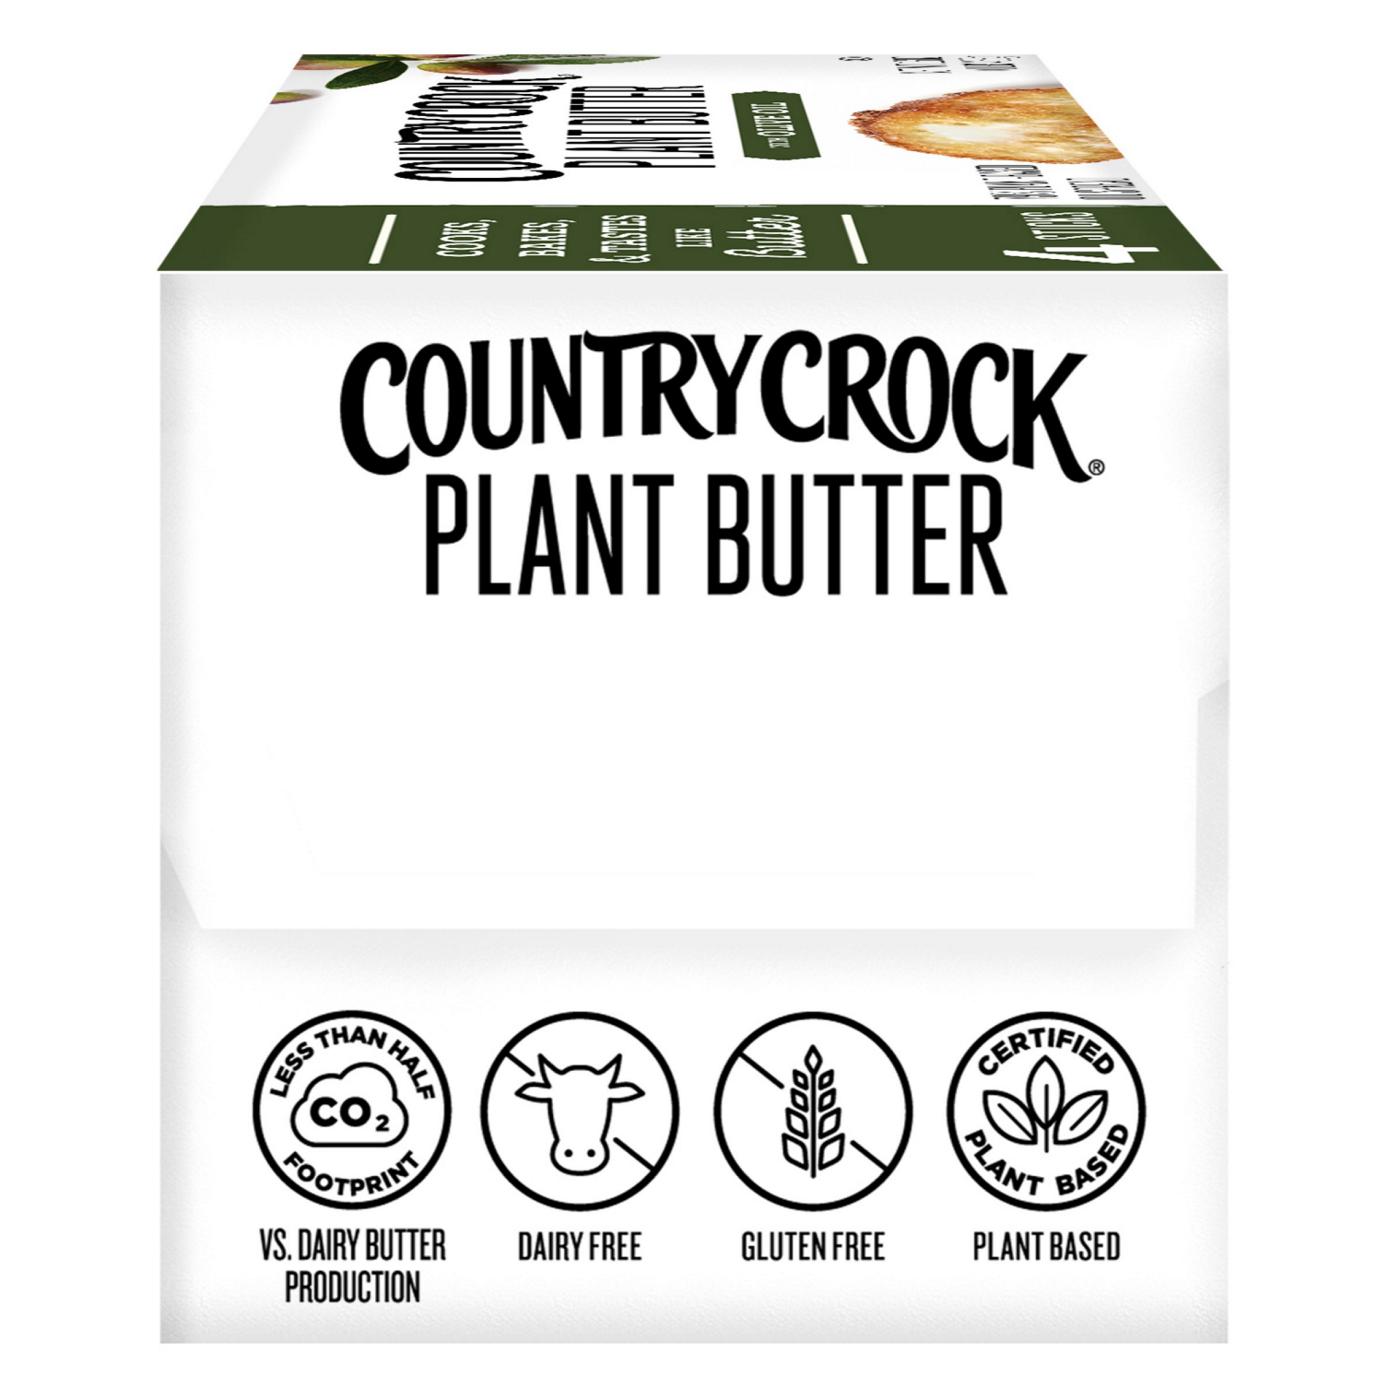 Country Crock Dairy Free Plant Butter with Olive Oil Sticks; image 8 of 9